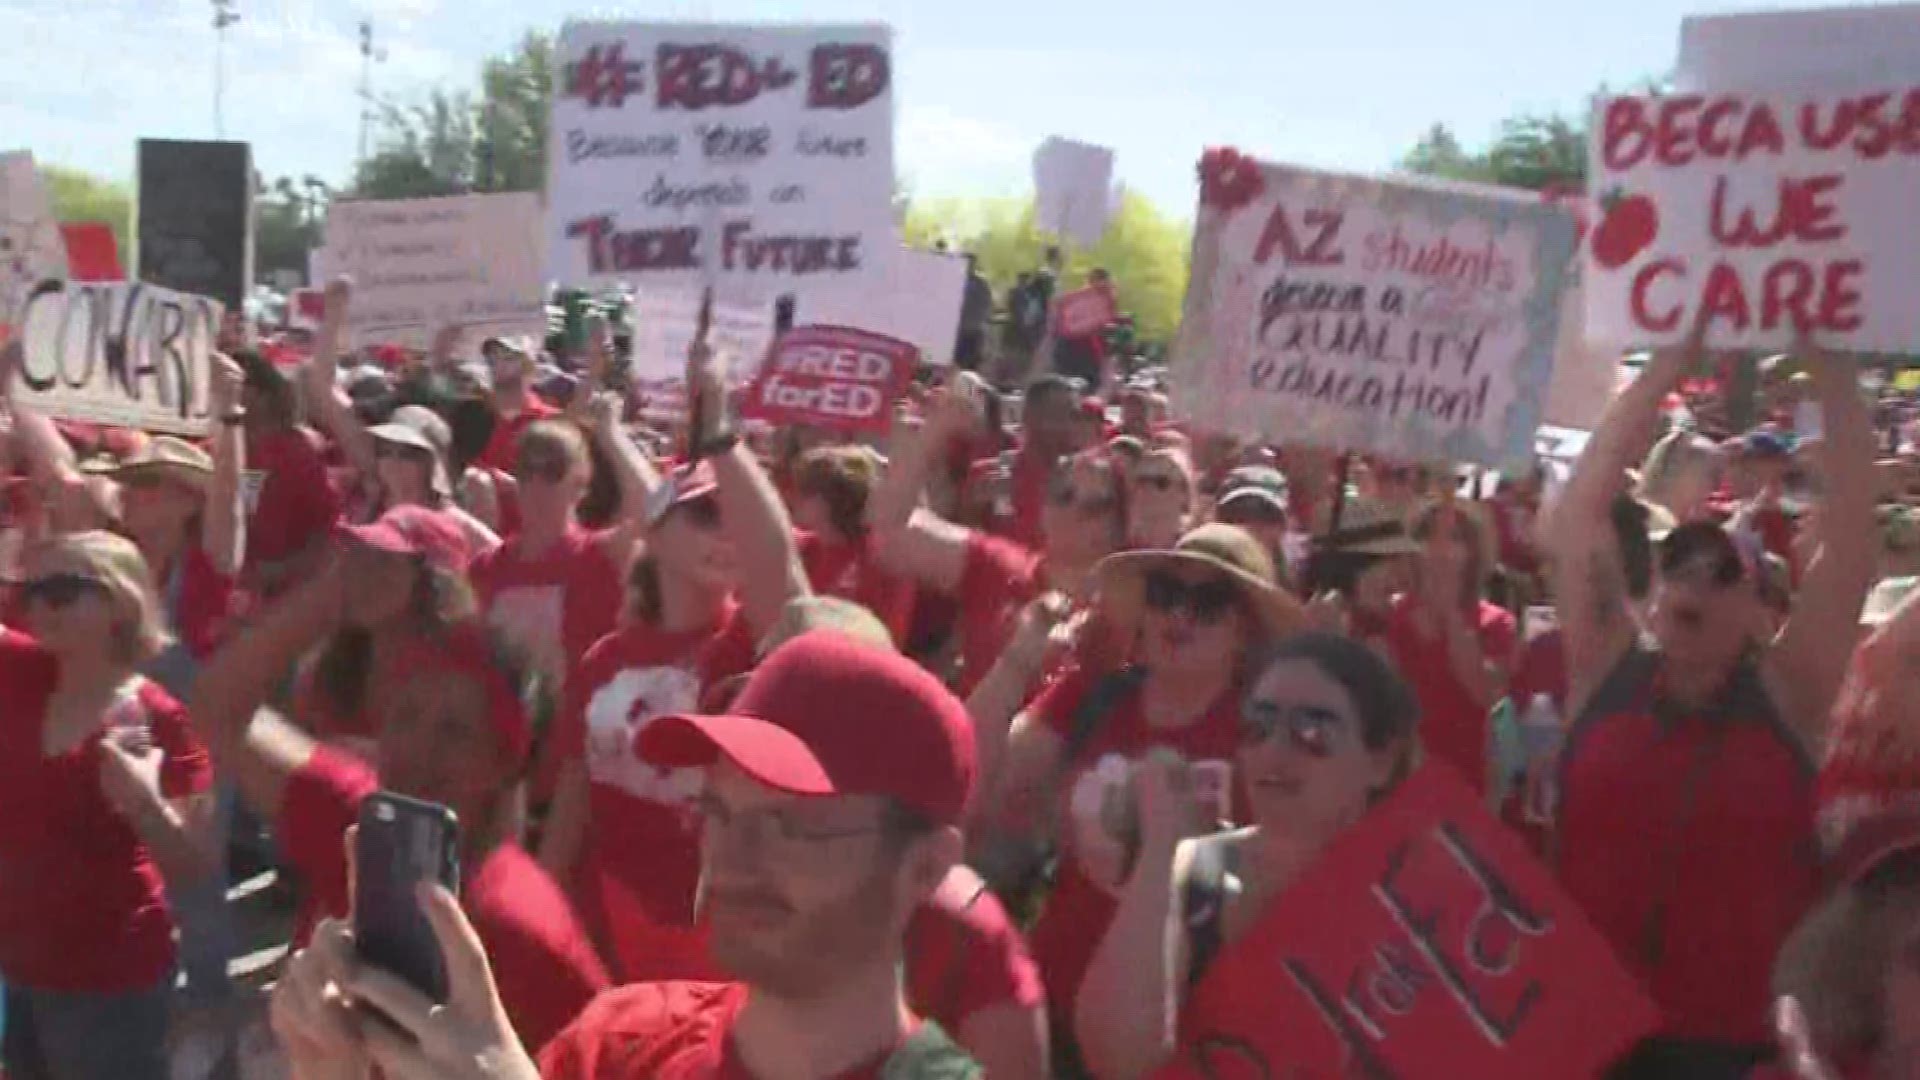 Friday marks the first anniversary of the Red for Ed walkout. This time last year the streets outside the capitol were swarmed with red shirts and homemade signs to protest for change and better pay for teachers.